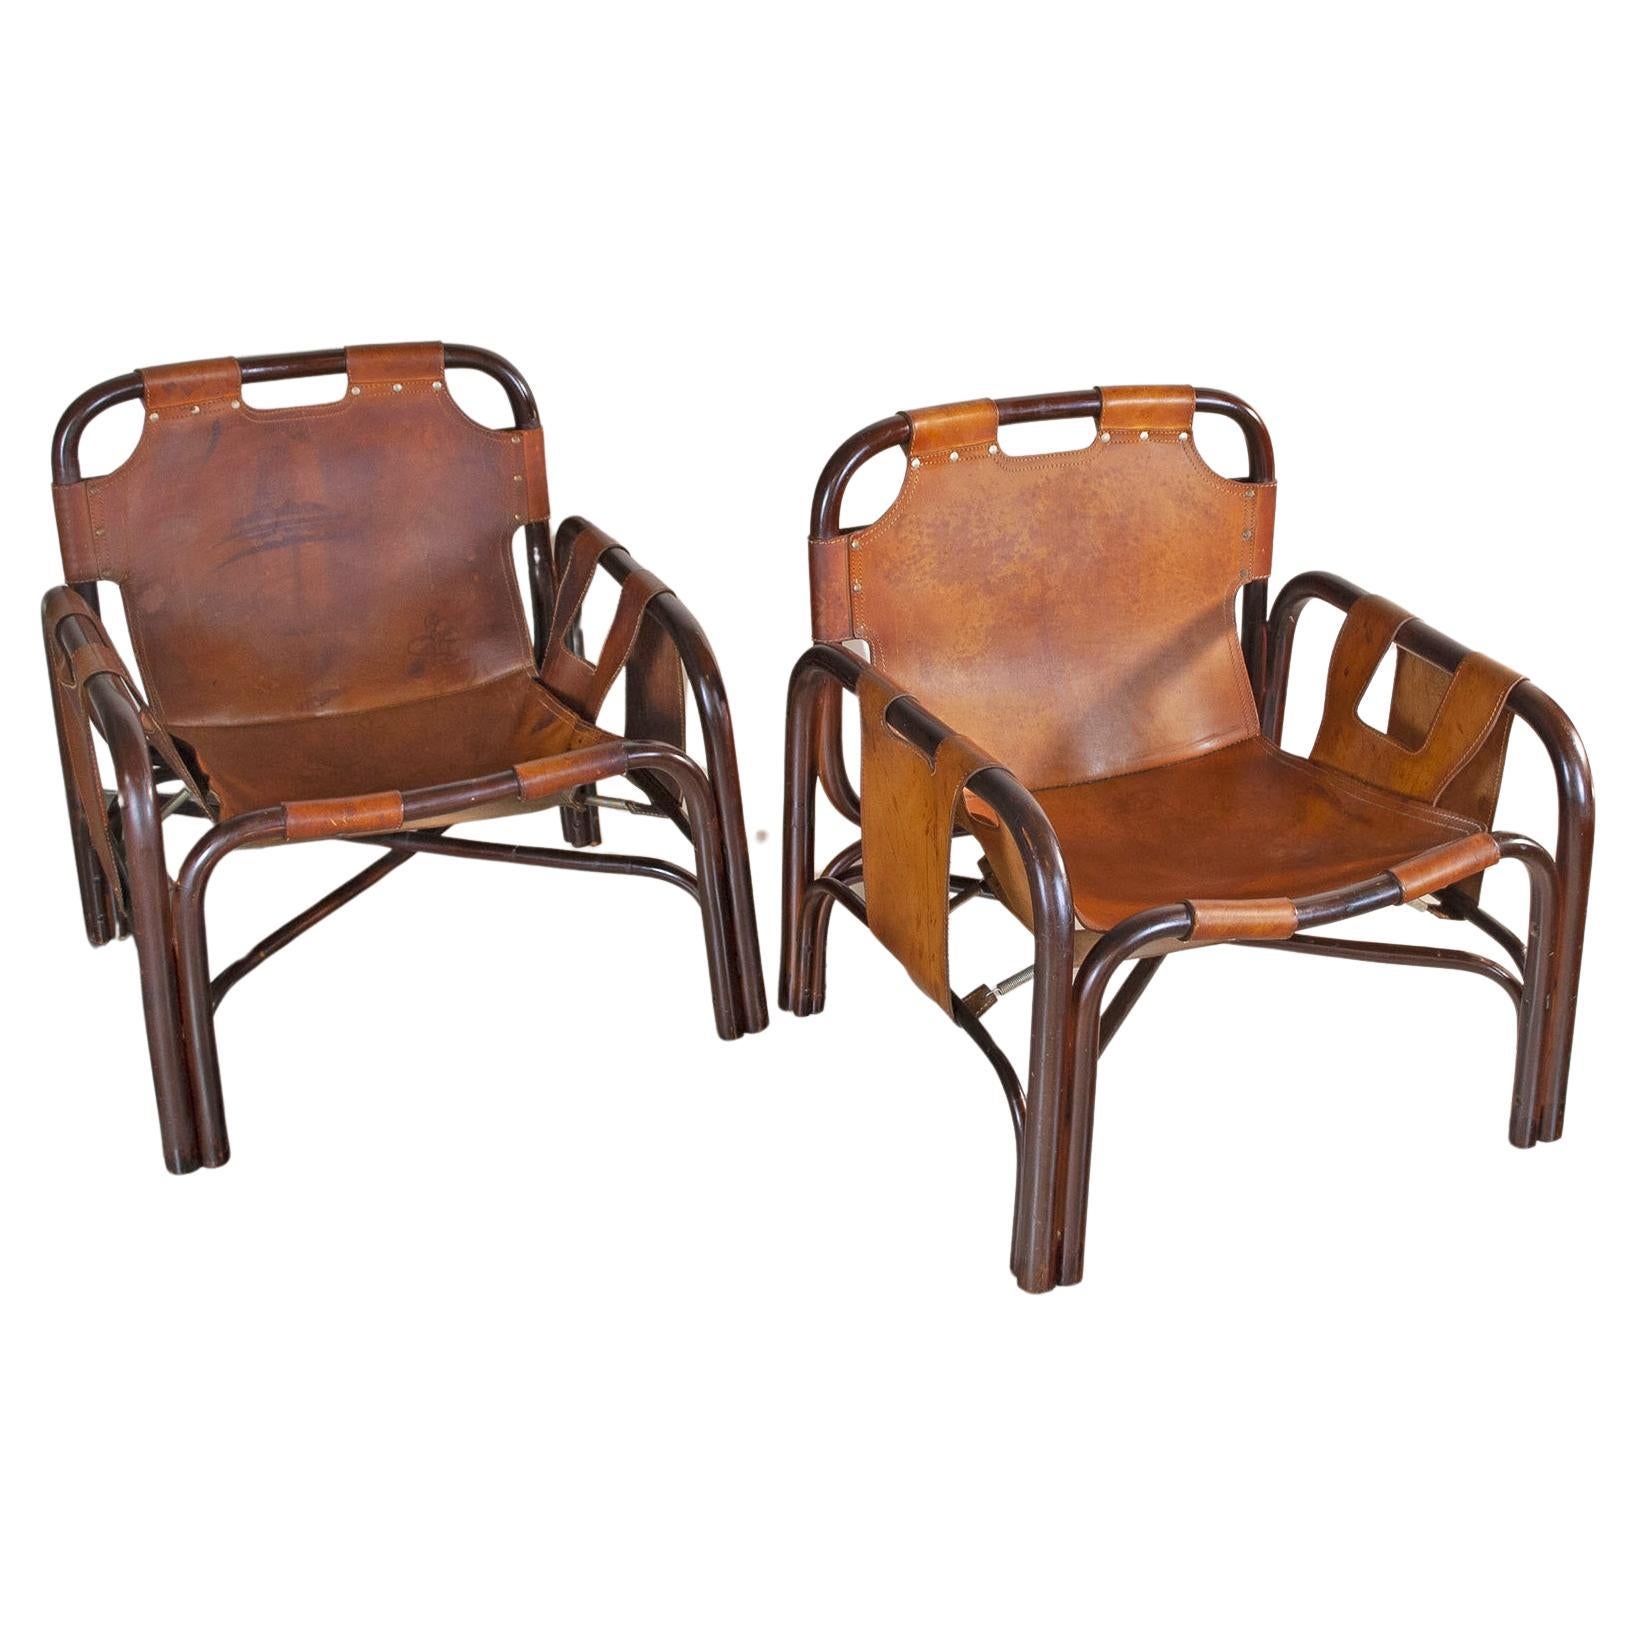 Tito Agnoli set of two bamboo cane armchairs 1960s For Sale